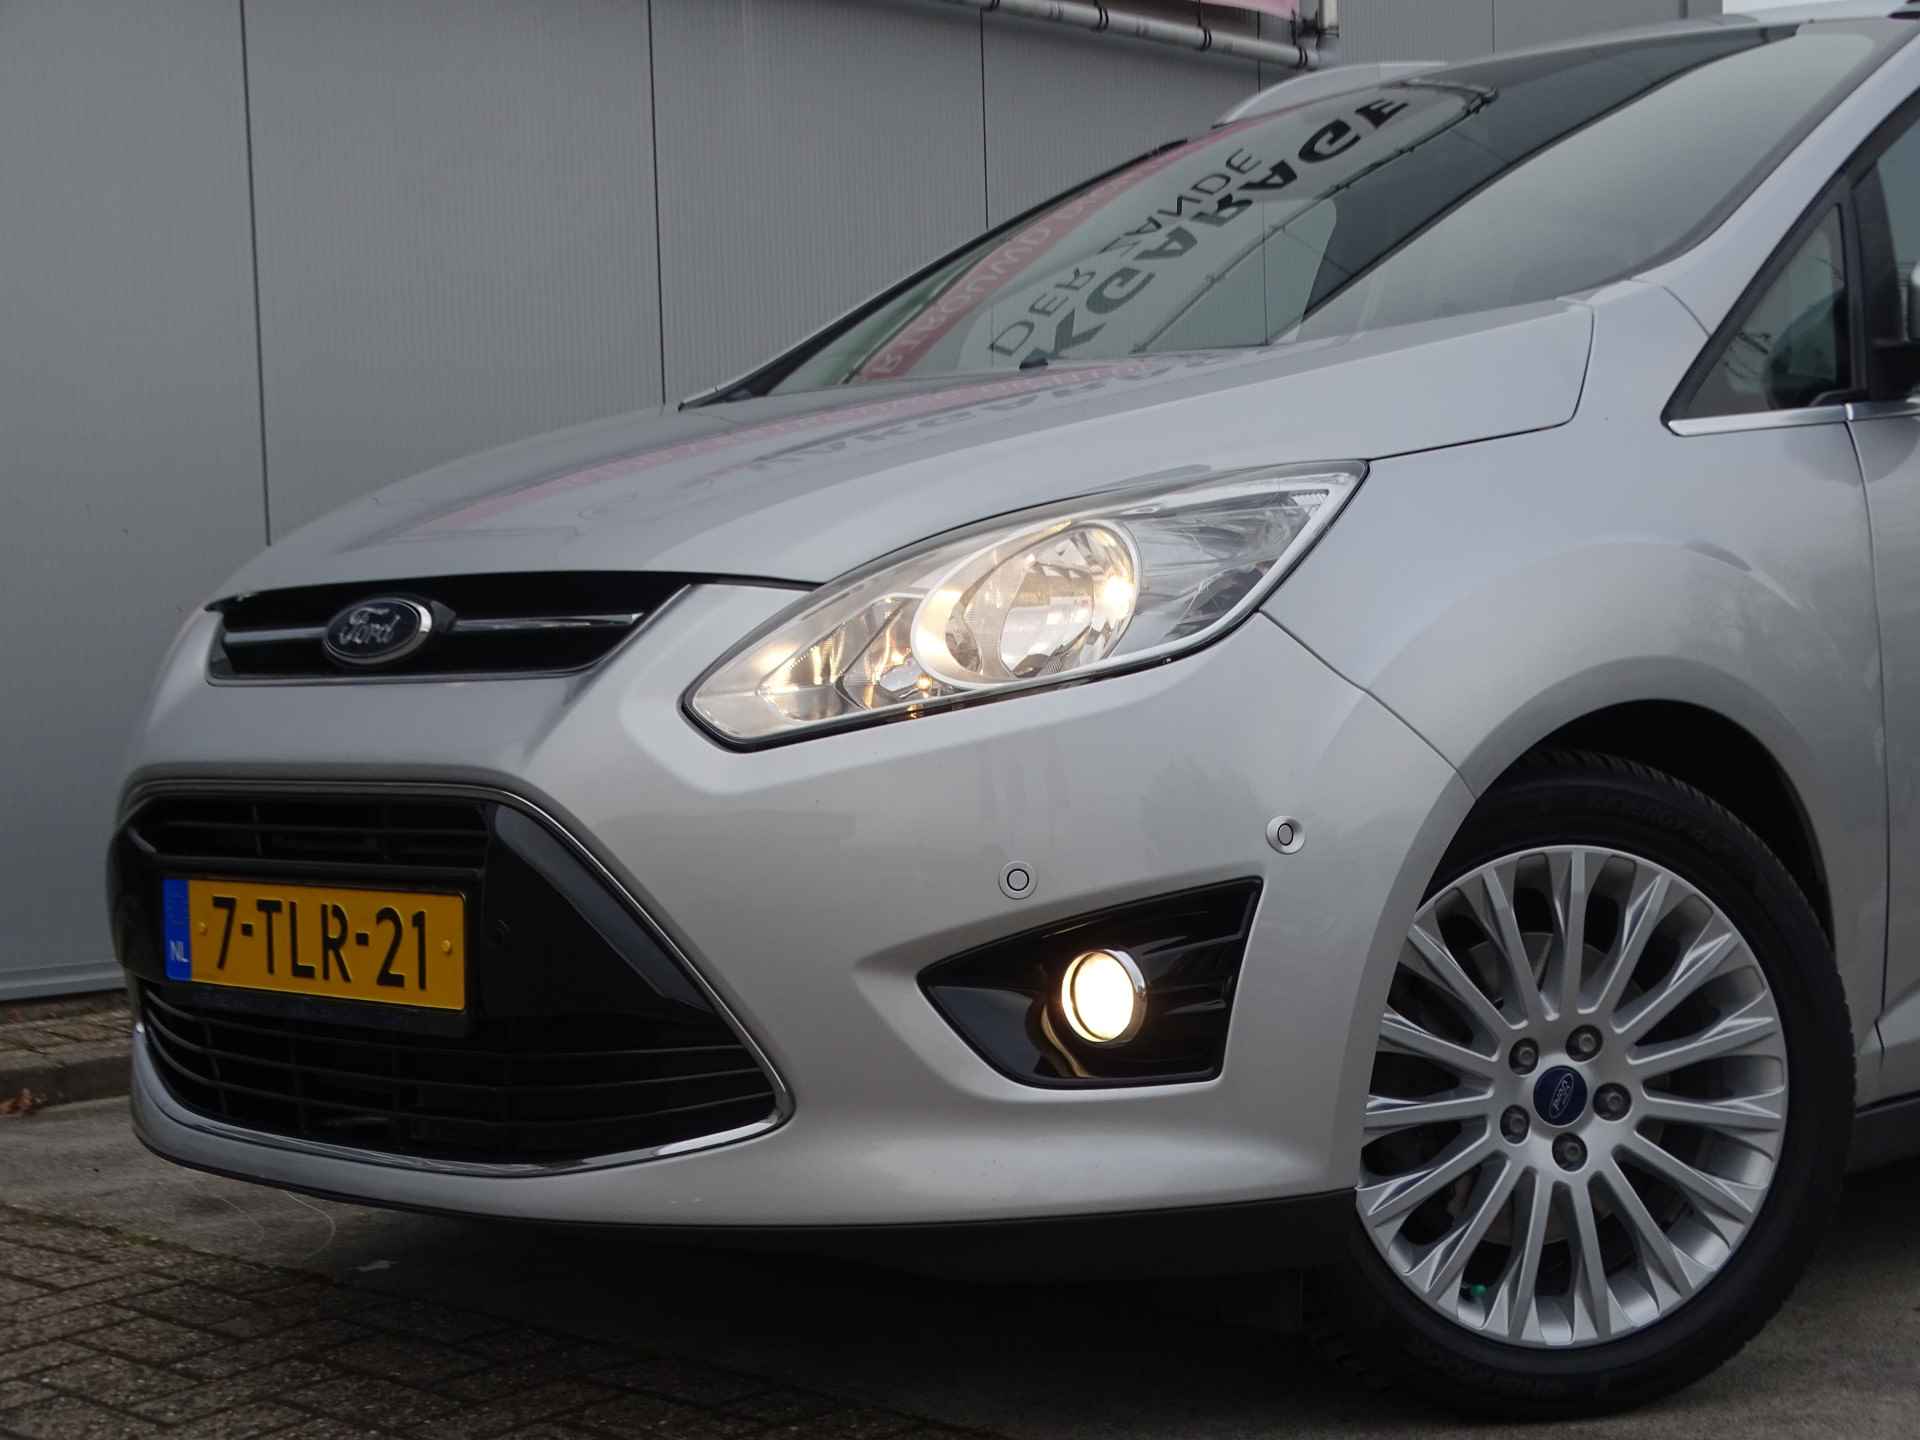 Ford Grand C-Max 1.0 Ed Plus 7 PERSOONS, Cruise Control, Camera, Compleet, NAP! - 67/70